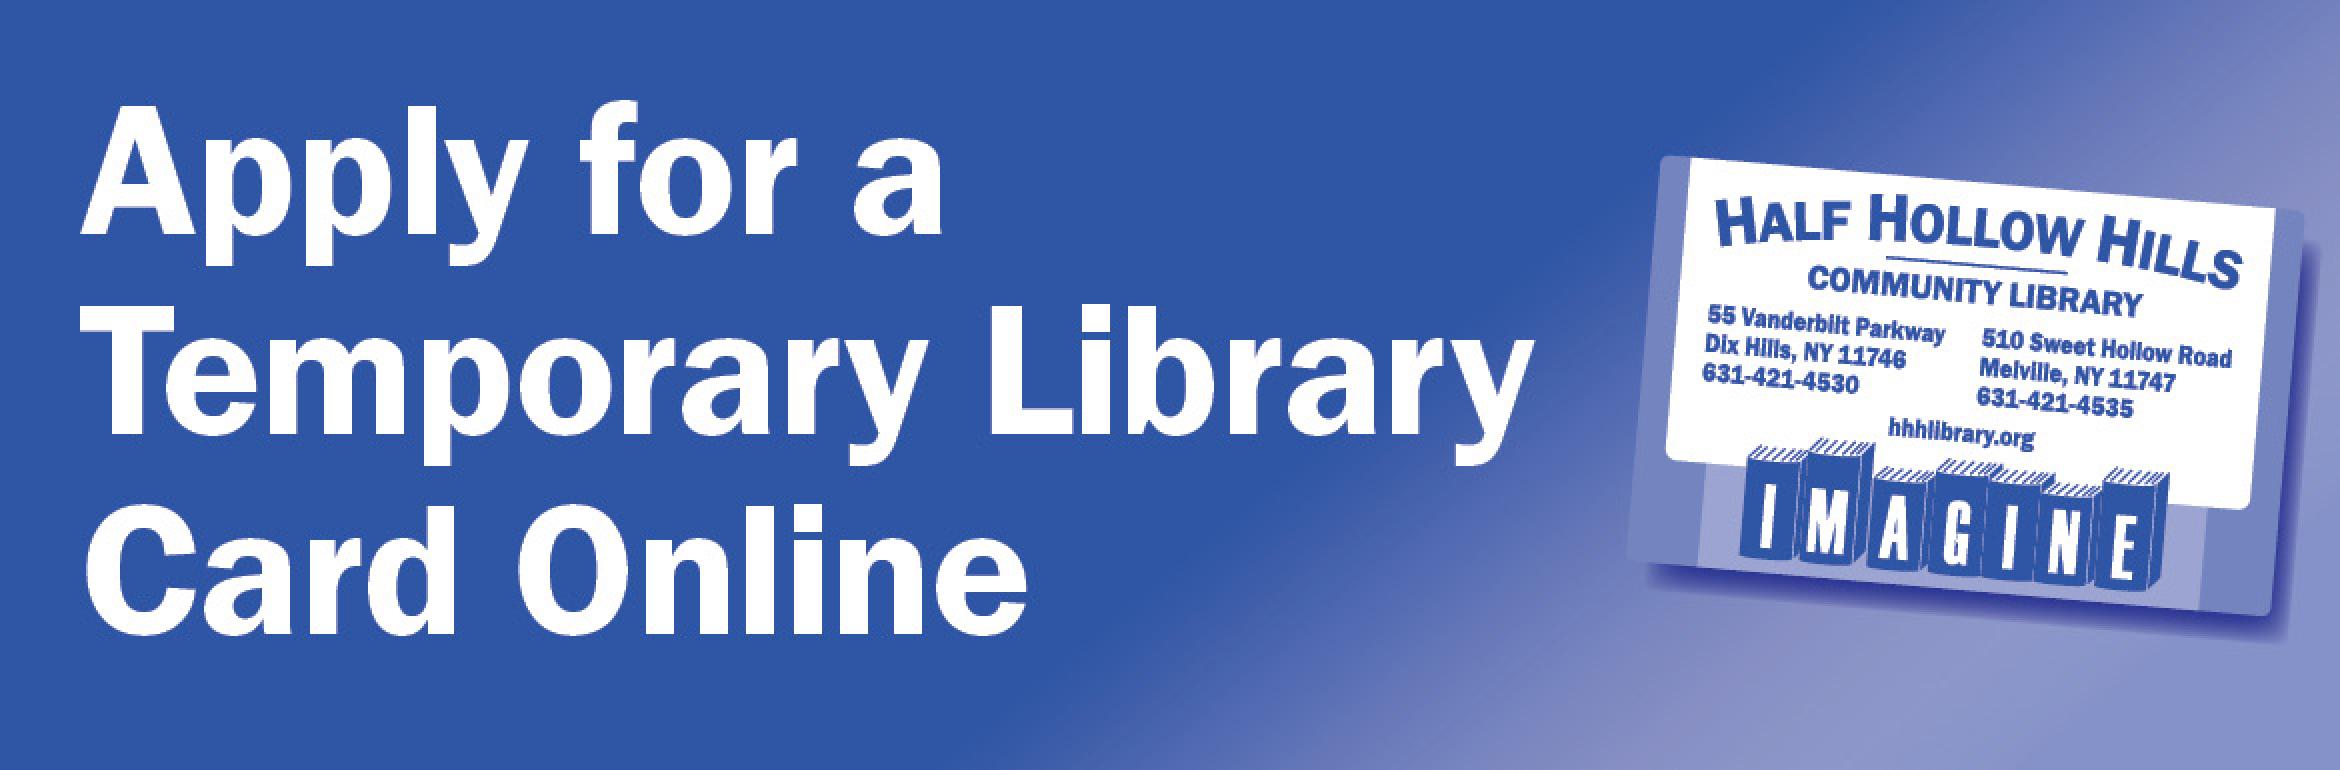 Apply for a Temporary Library Card Online